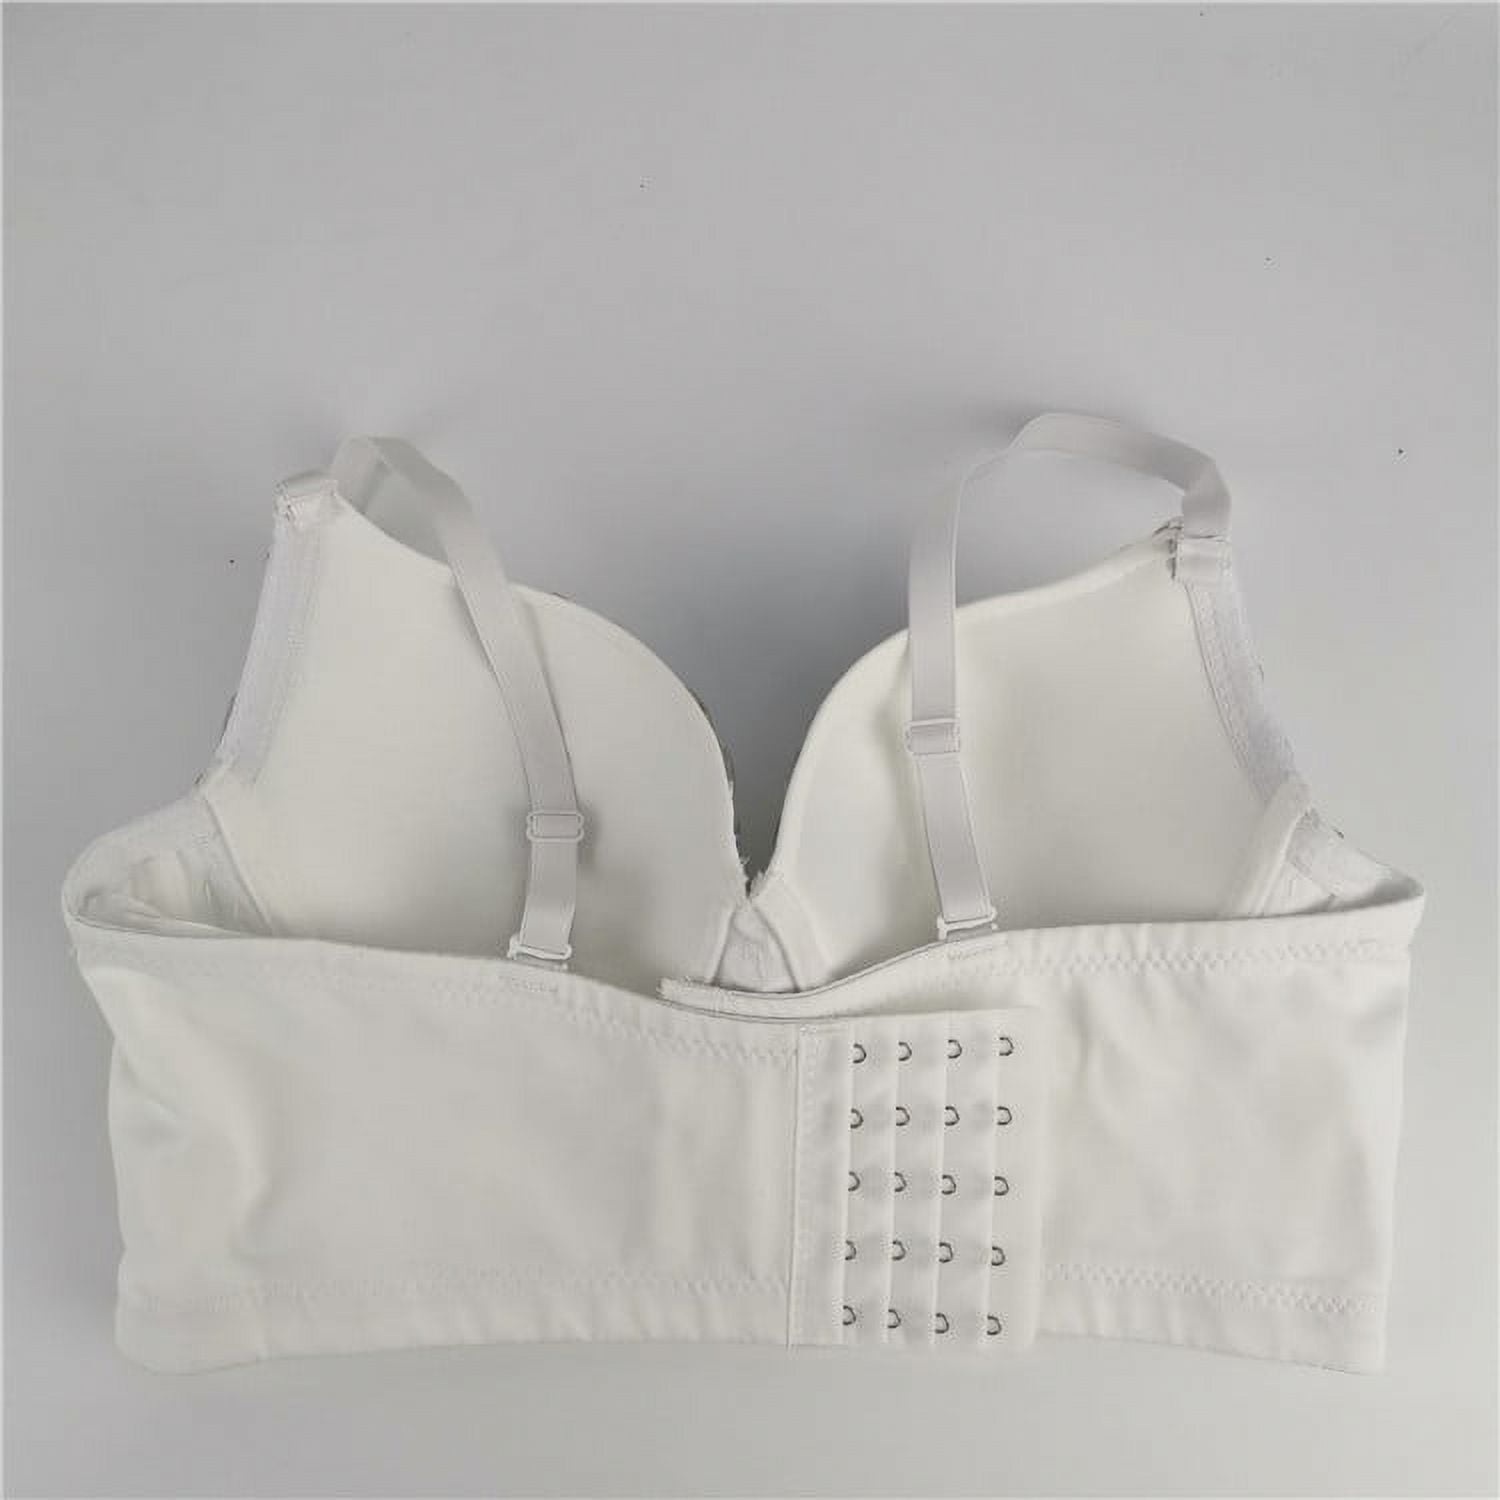 Embellished Ivory Cream Push up Bra Top Bustier Hand Decorated With  Sequins. -  Canada